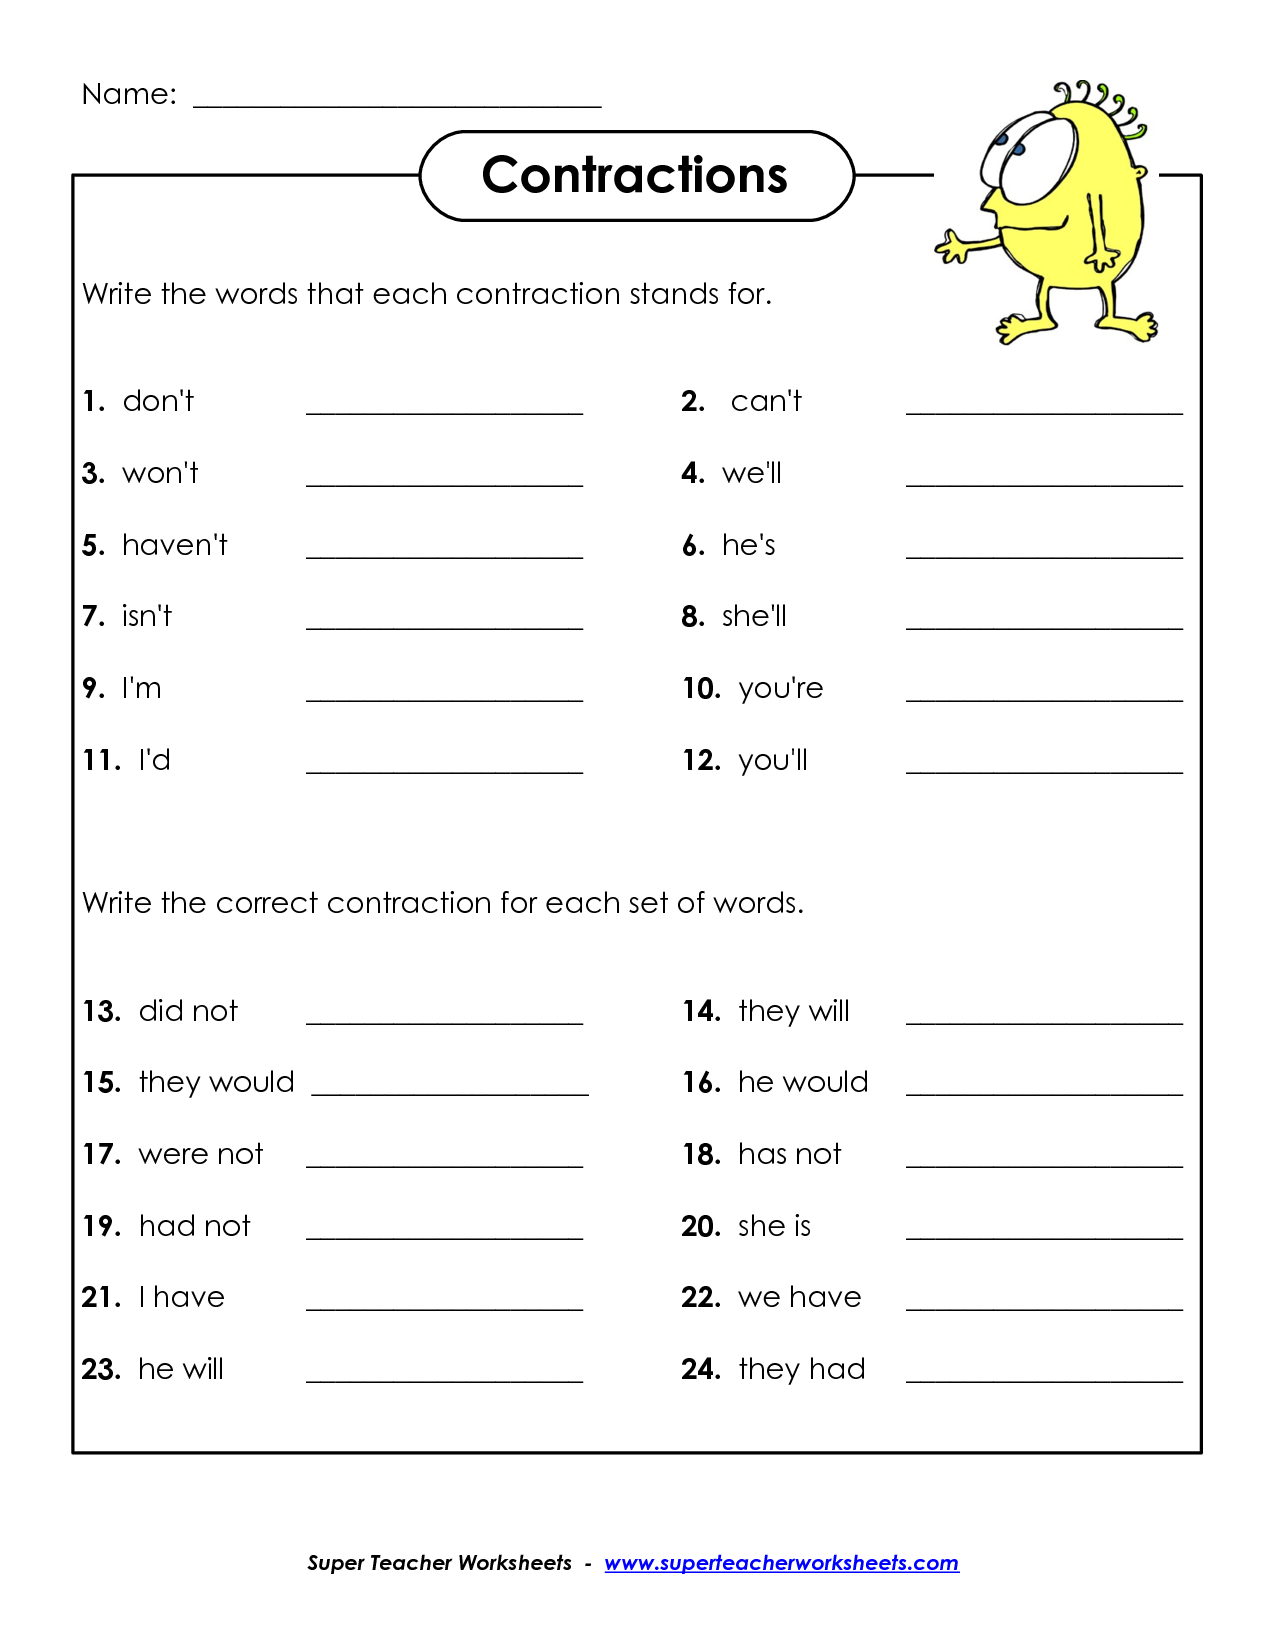 search-results-for-contraction-words-worksheets-calendar-2015